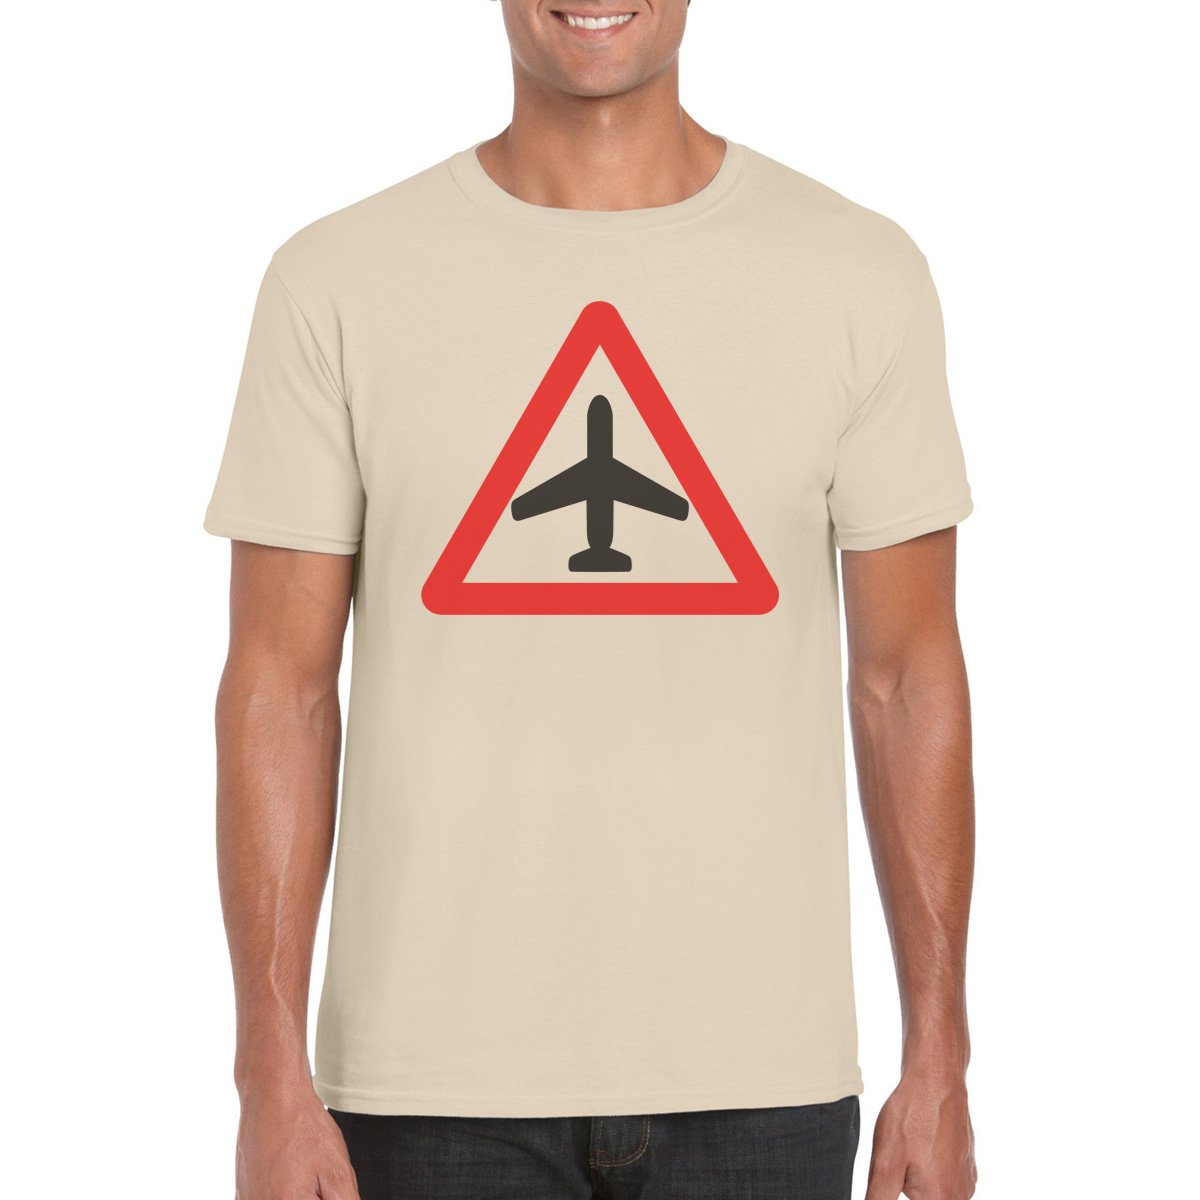 CAUTION AIRCRAFT Semi-Fitted Unisex T-Shirt